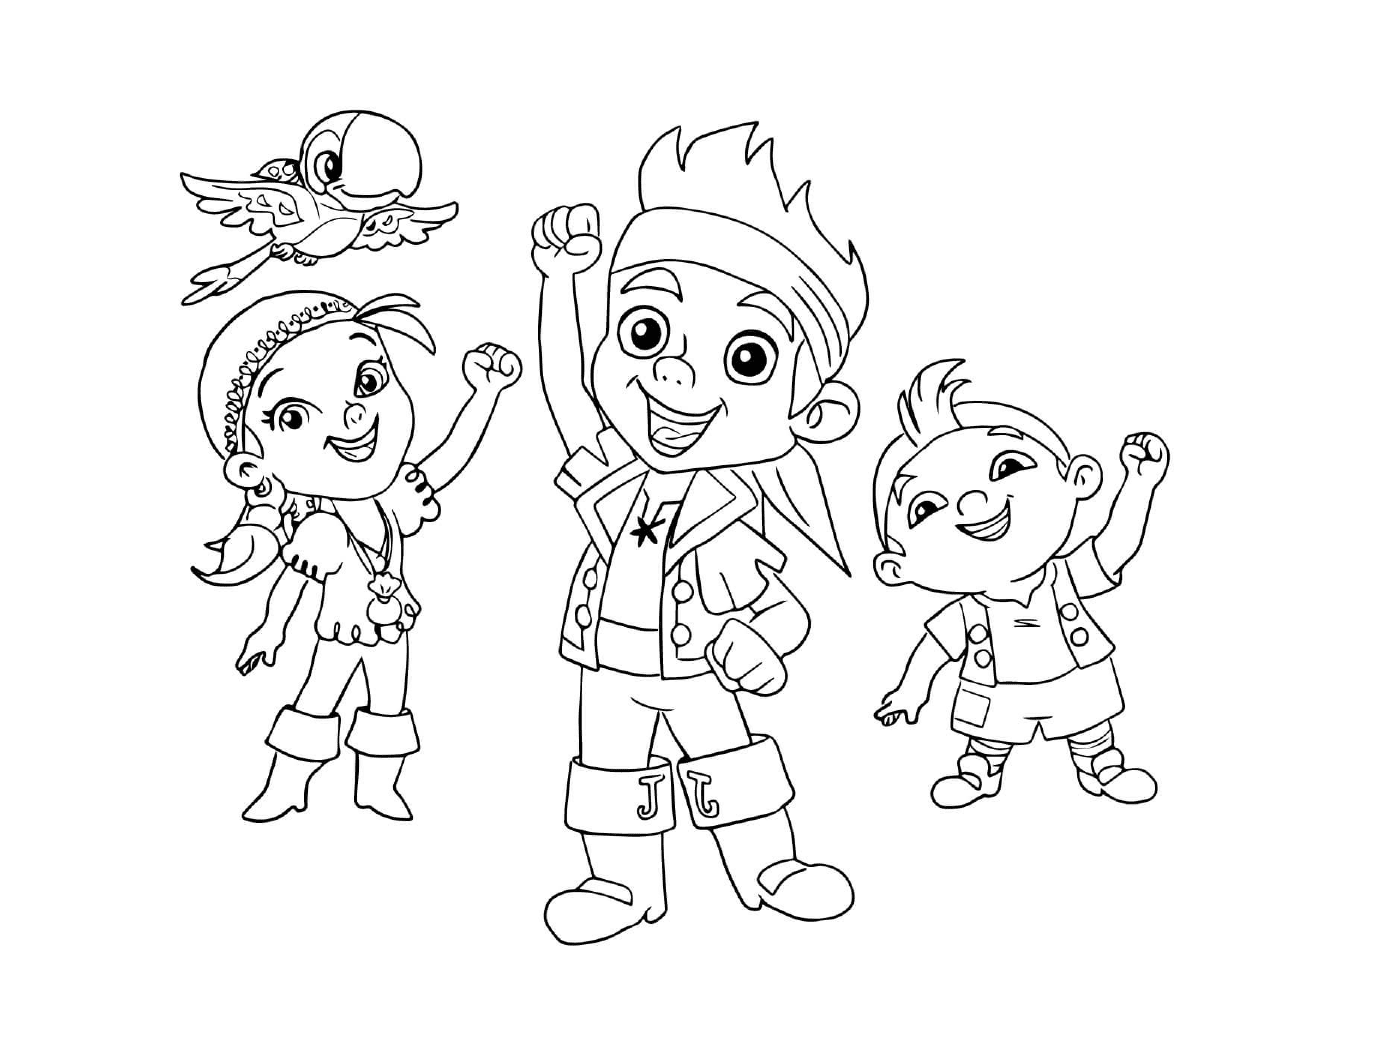  Jake, Izzy, Cubby and Skully, child pirates 